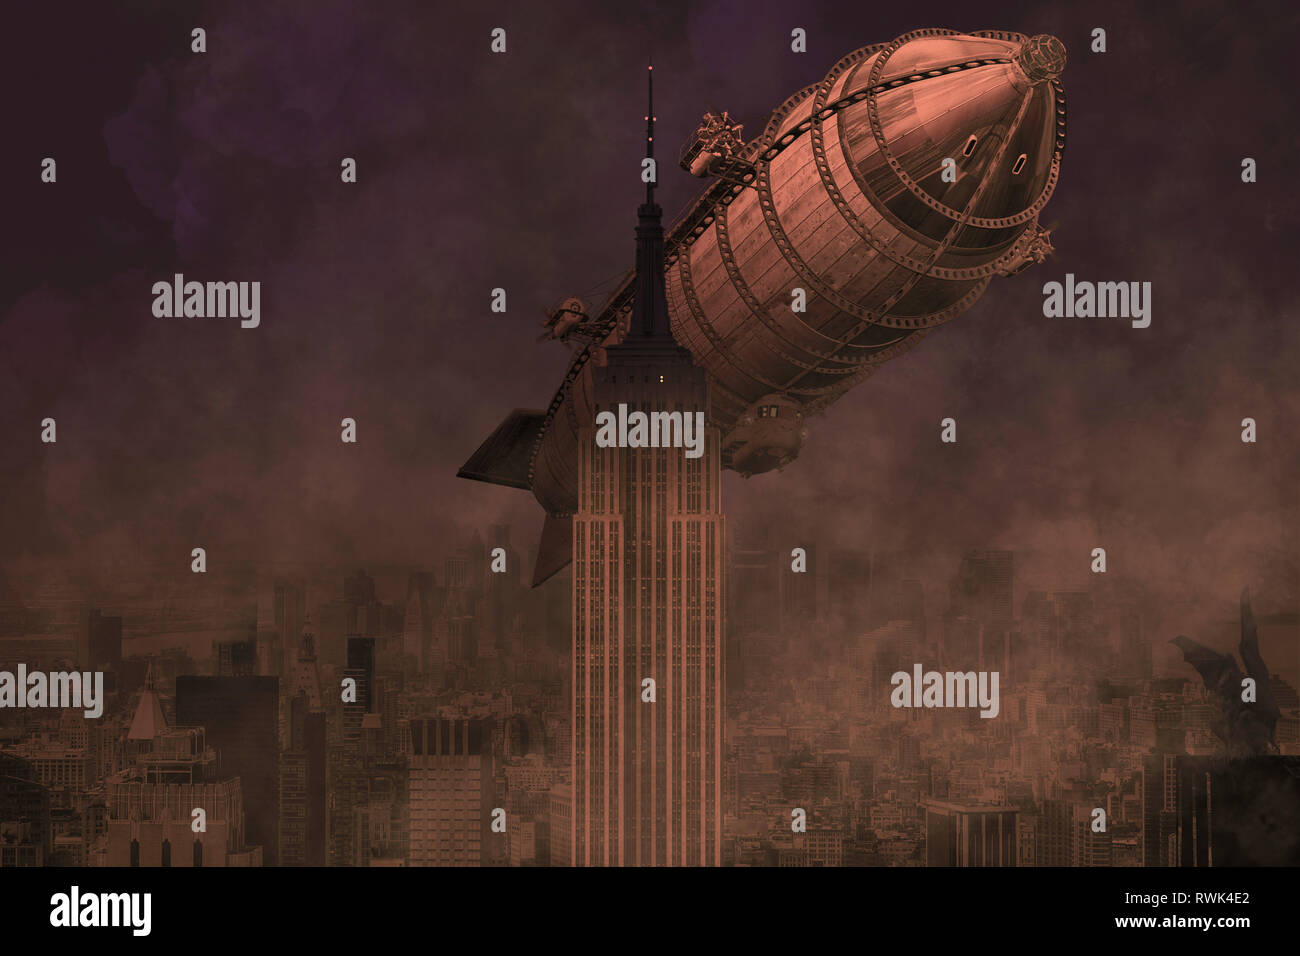 A rigid airship flies by the Empire State Building, ready to collide, composite image Stock Photo